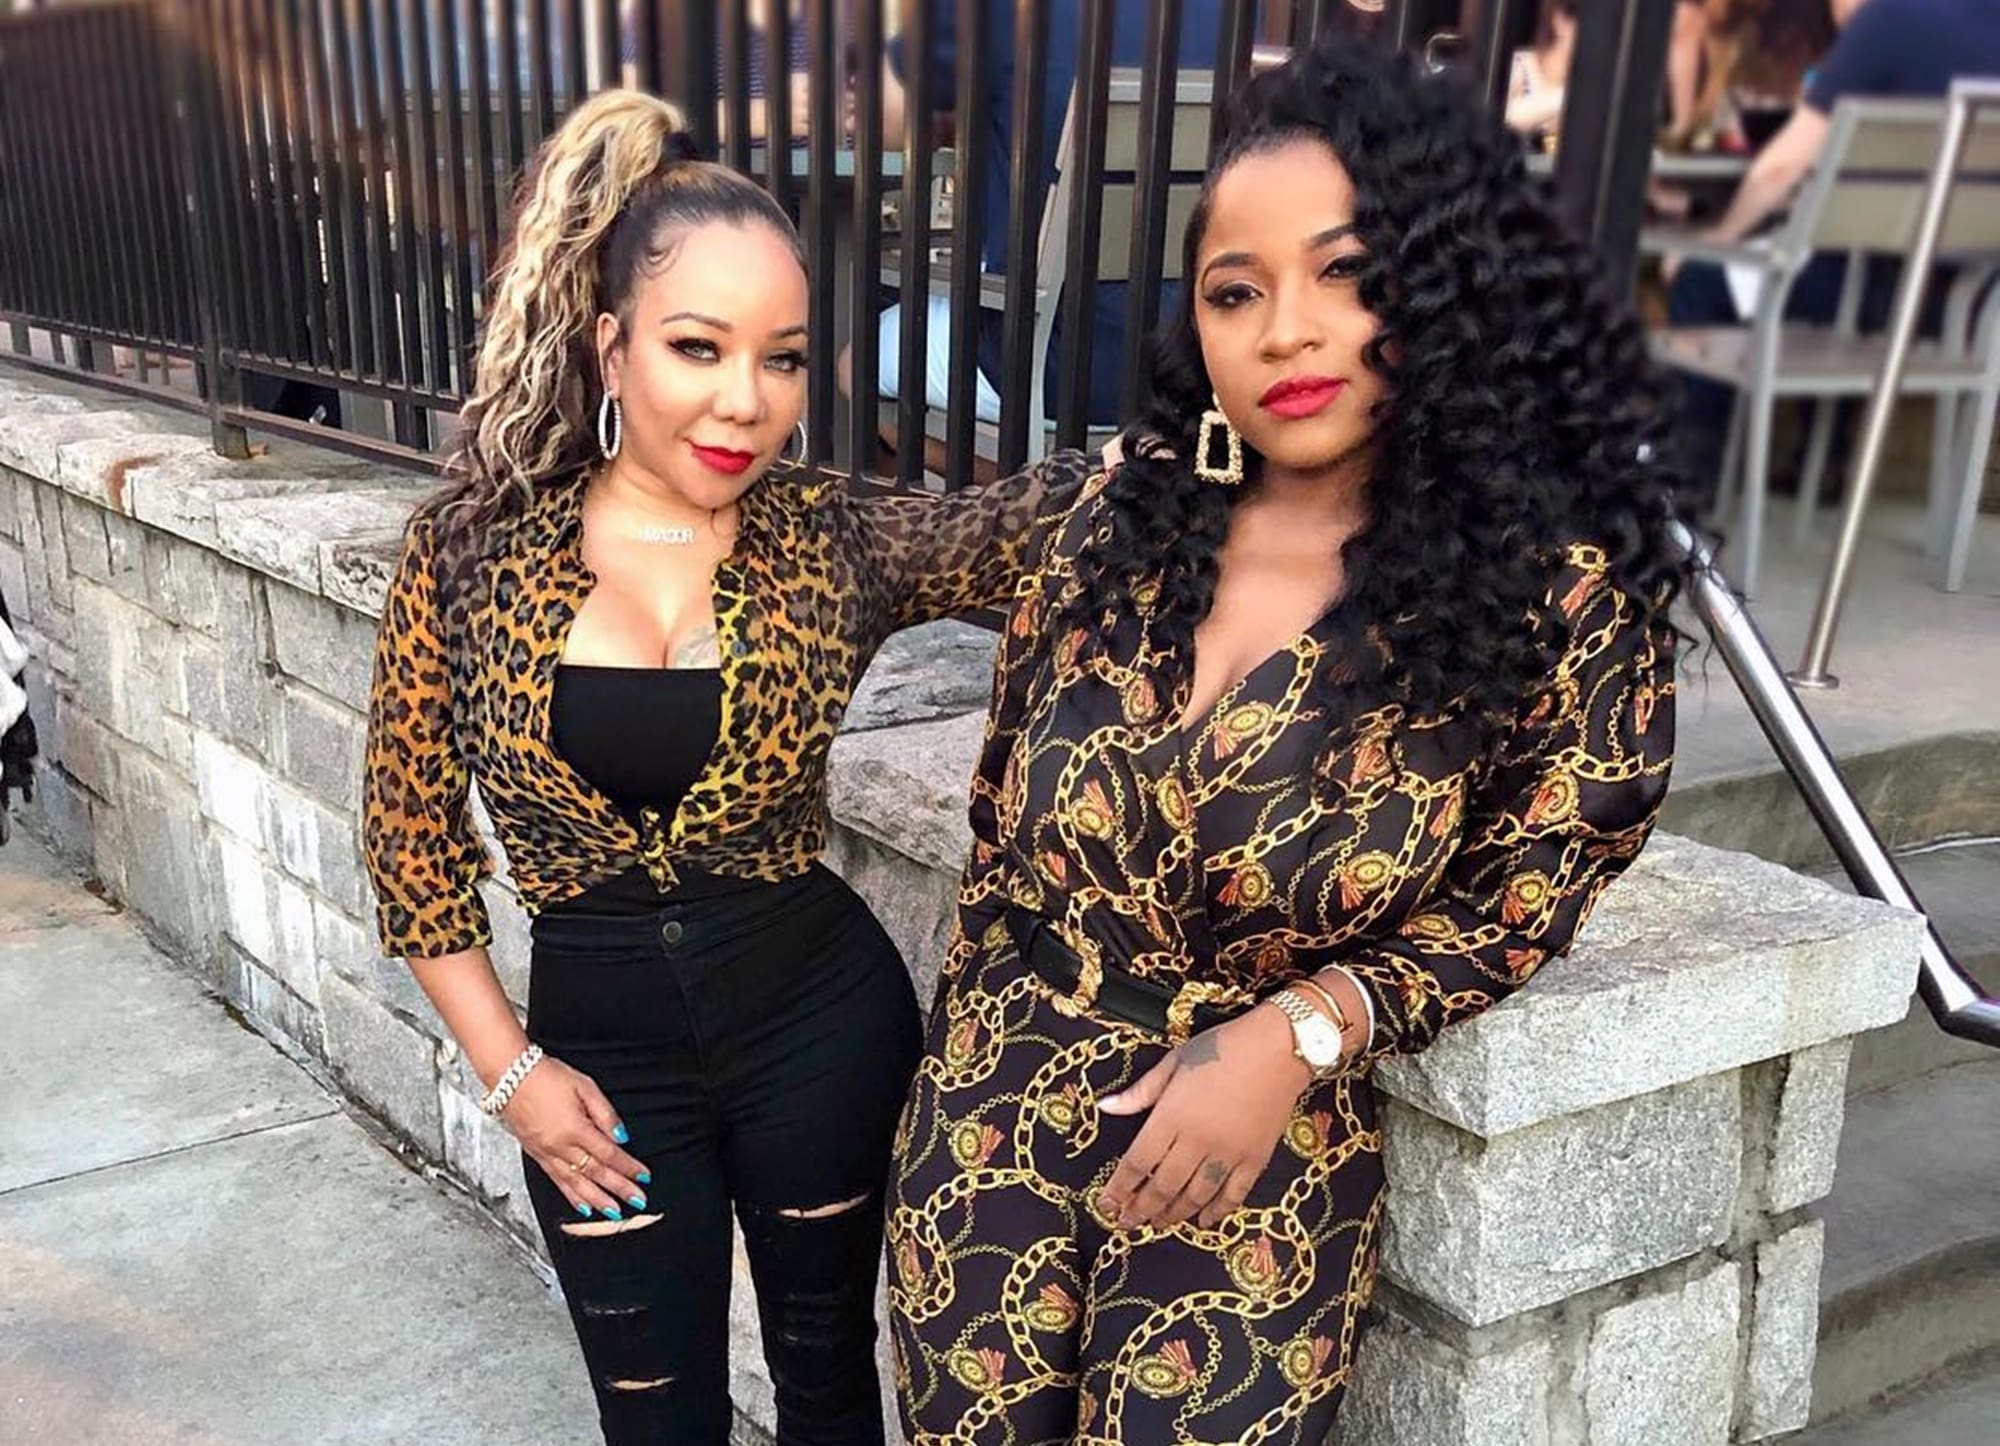 Toya Wright Happily Announces Fans That ‘T.I. & Tiny: Friends and Family Hustle’ Returns On Monday, April 15